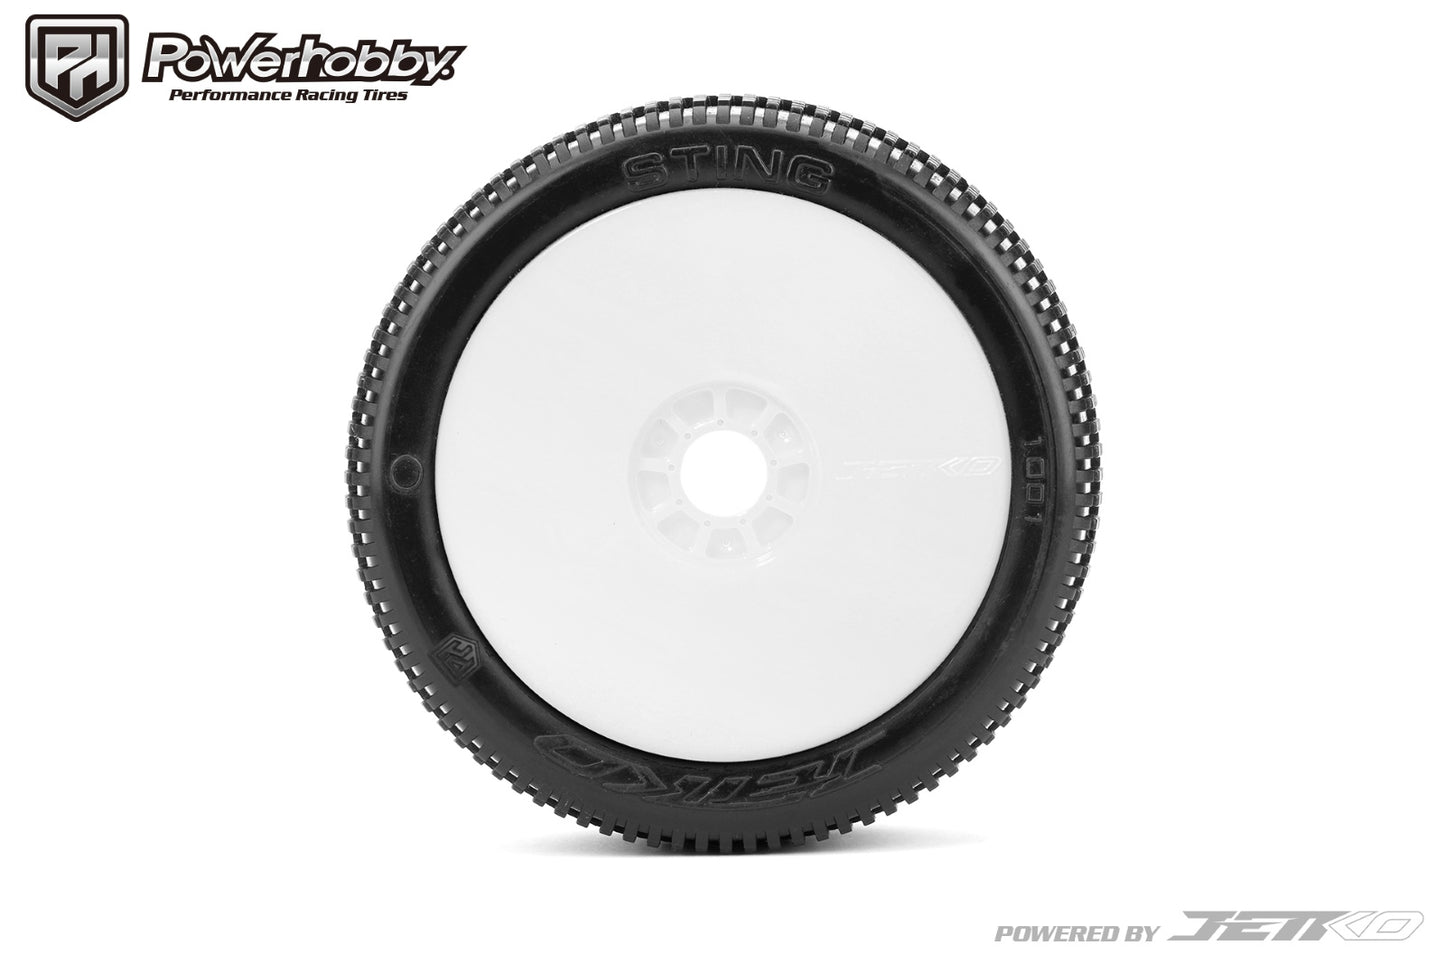 Powerhobby Sting 1/8 Buggy Mounted Tires White (2) Super Soft - PowerHobby